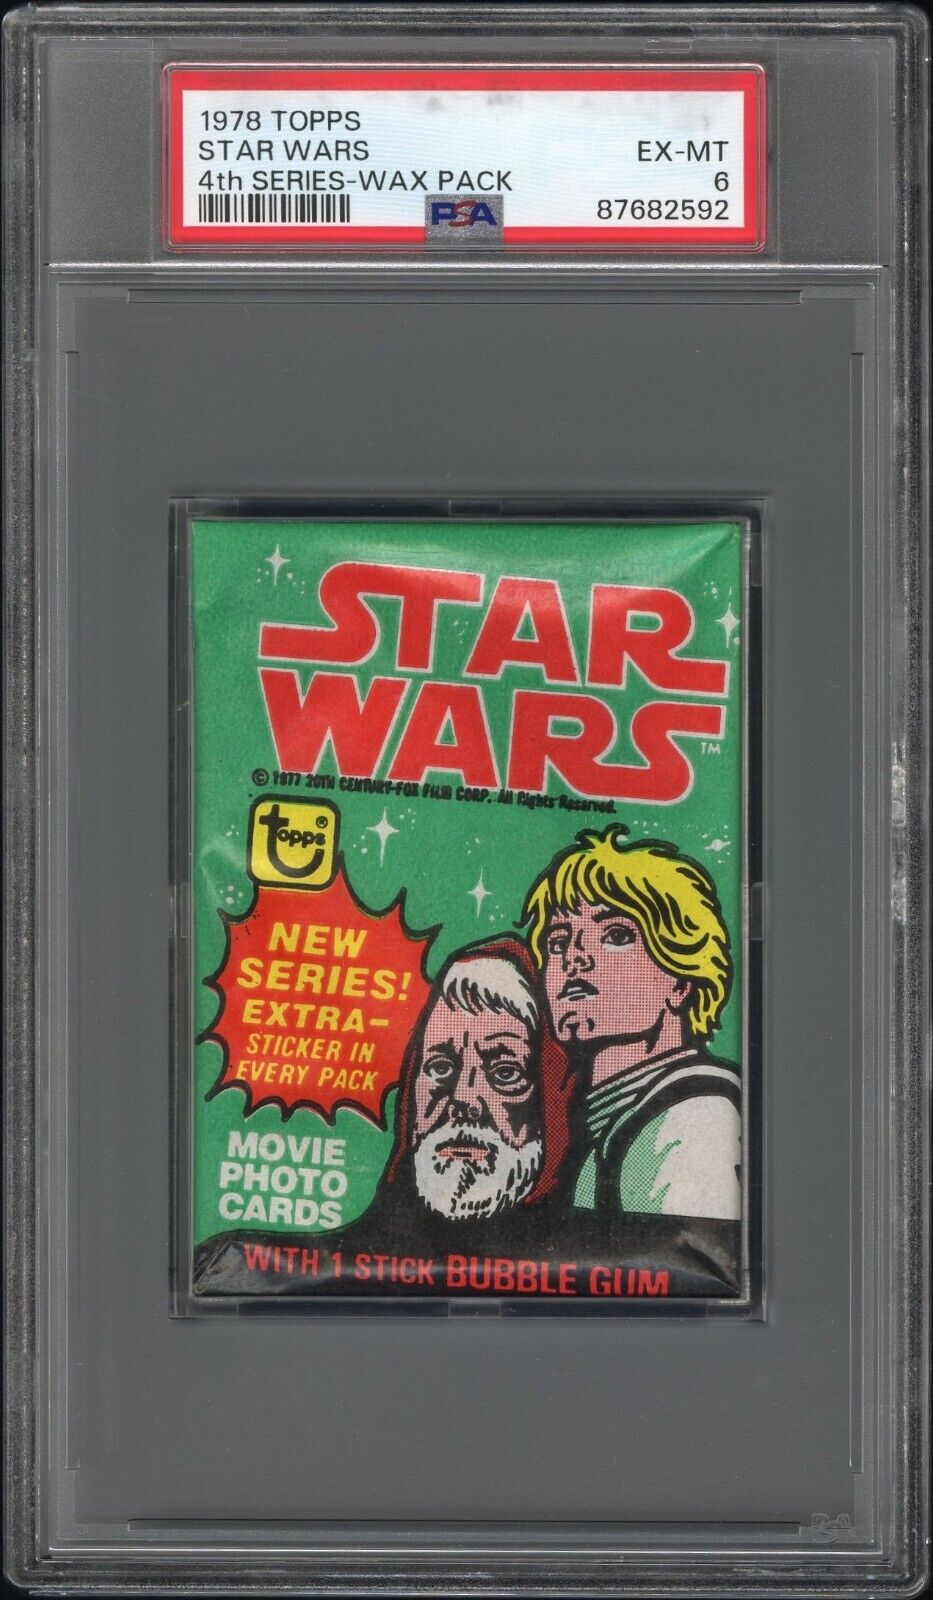 1977-78 Topps Star Wars 4th Series Wax Pack Sealed PSA 6 exmt